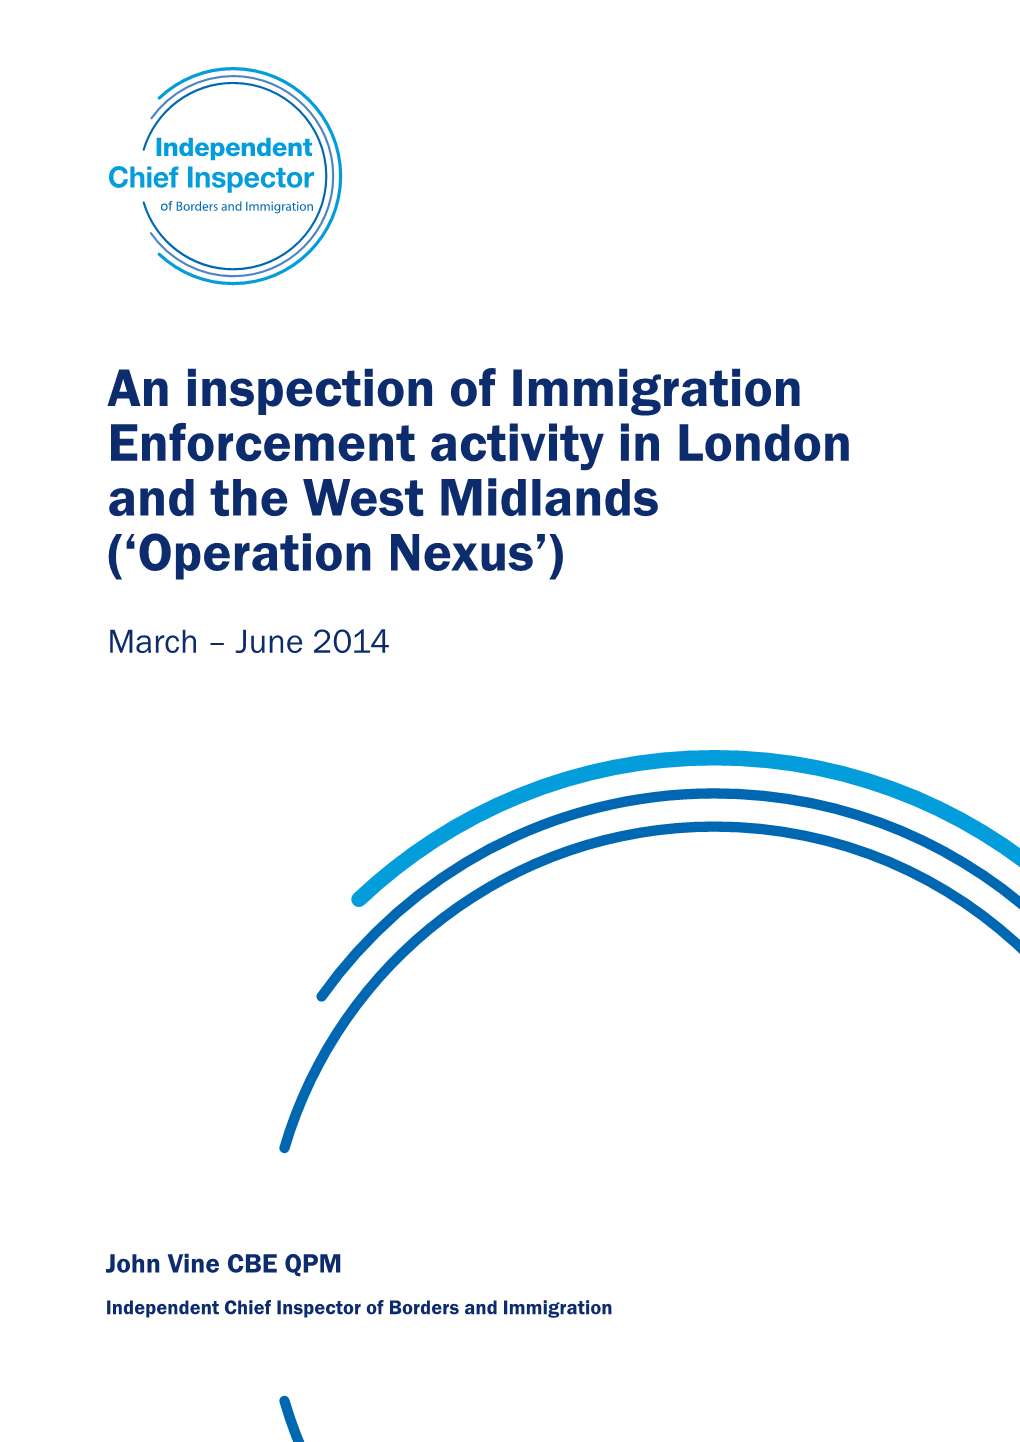 An Inspection of Immigration Enforcement Activity in London and the West Midlands (‘Operation Nexus’)